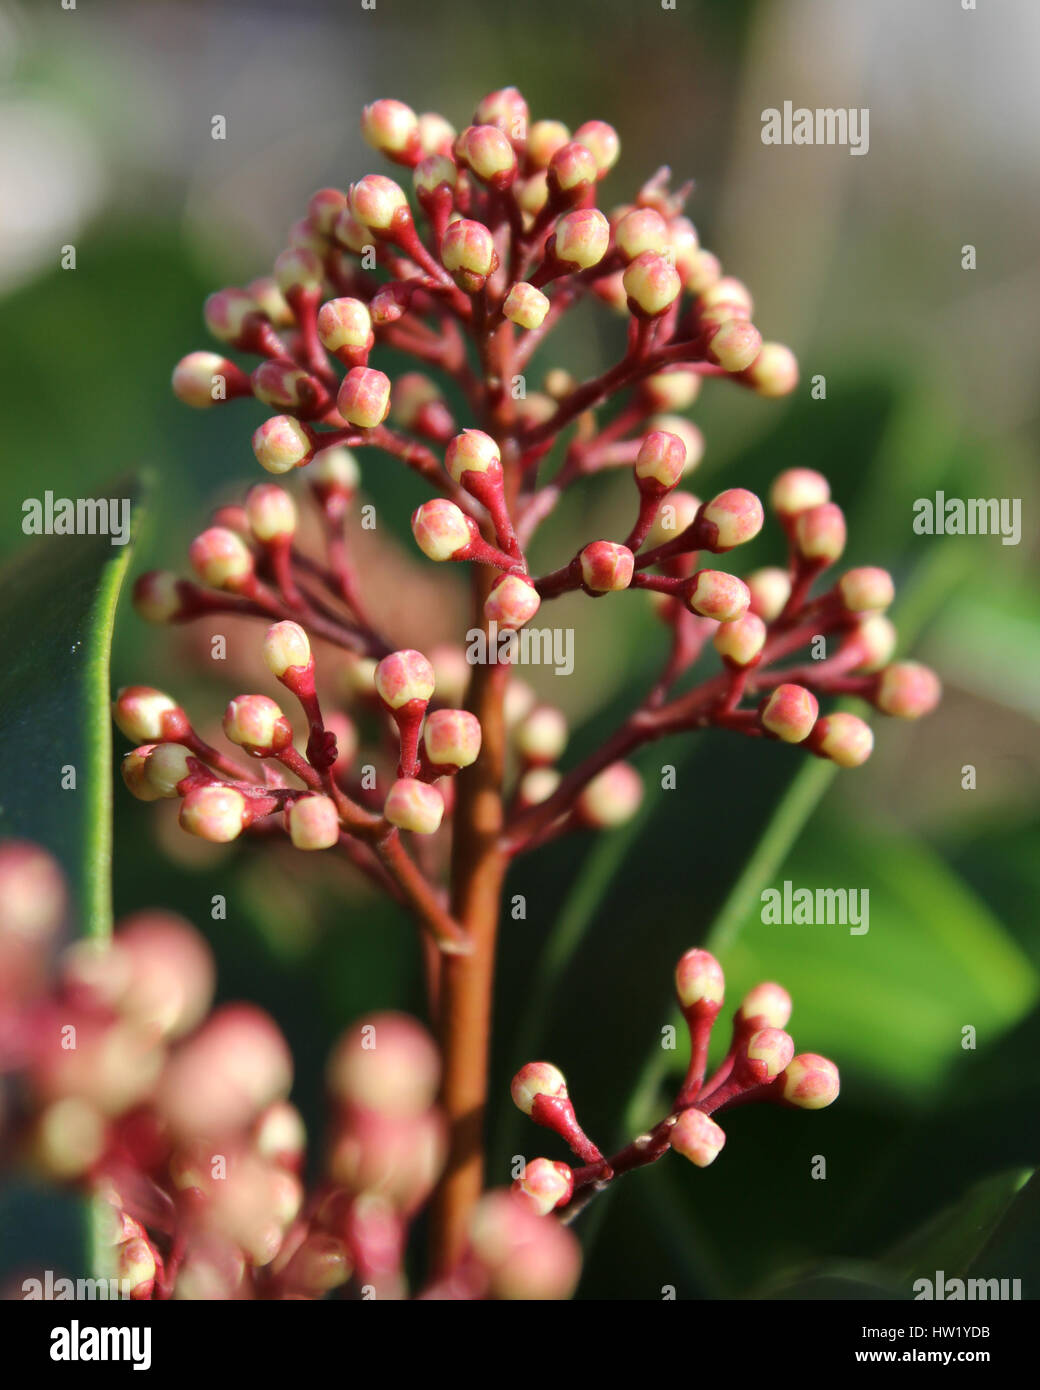 The unopened pink flower buds of Skimmia japonica also known as Japanese skimmia, a spring flowering evergreen shrub. Stock Photo